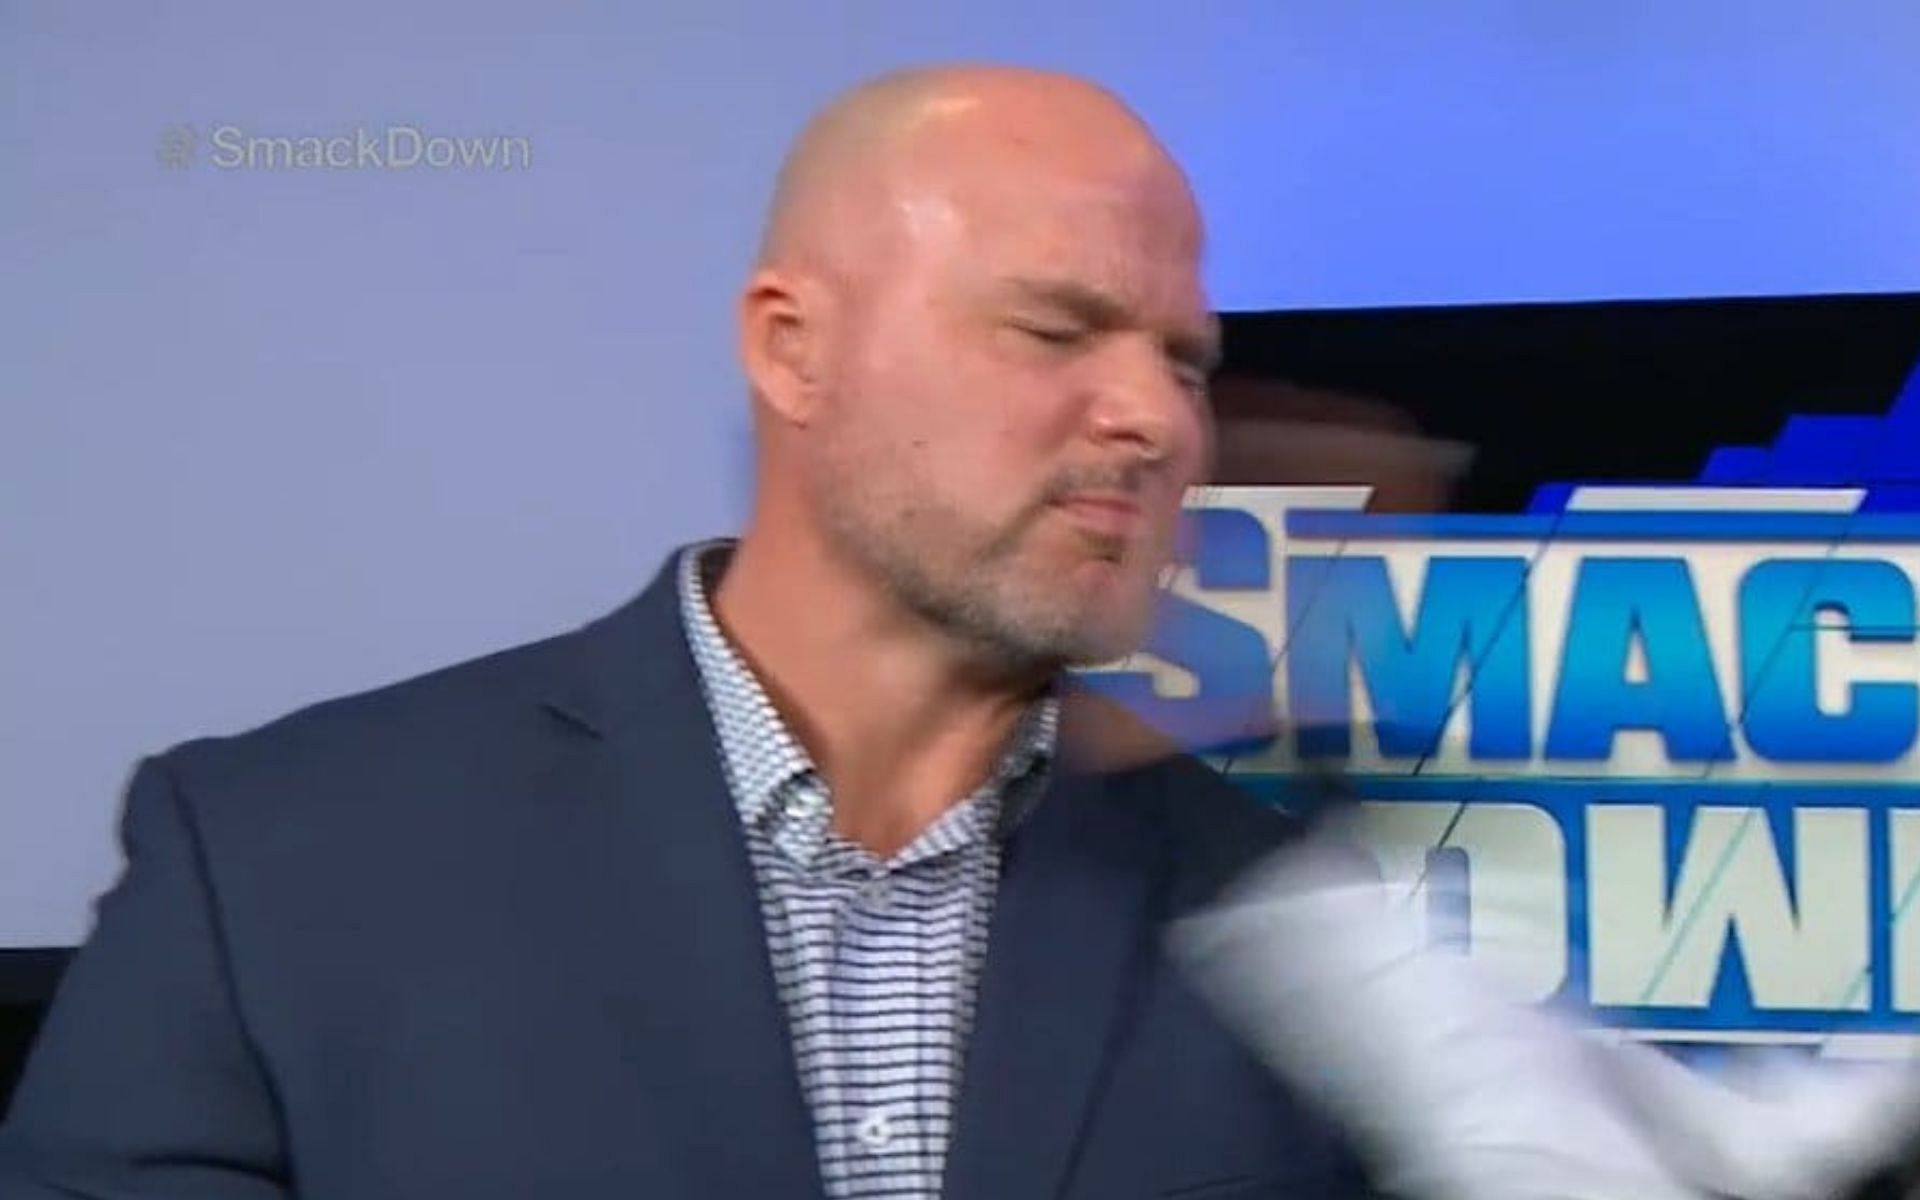 An old colleague humiliated the authority figure on SmackDown